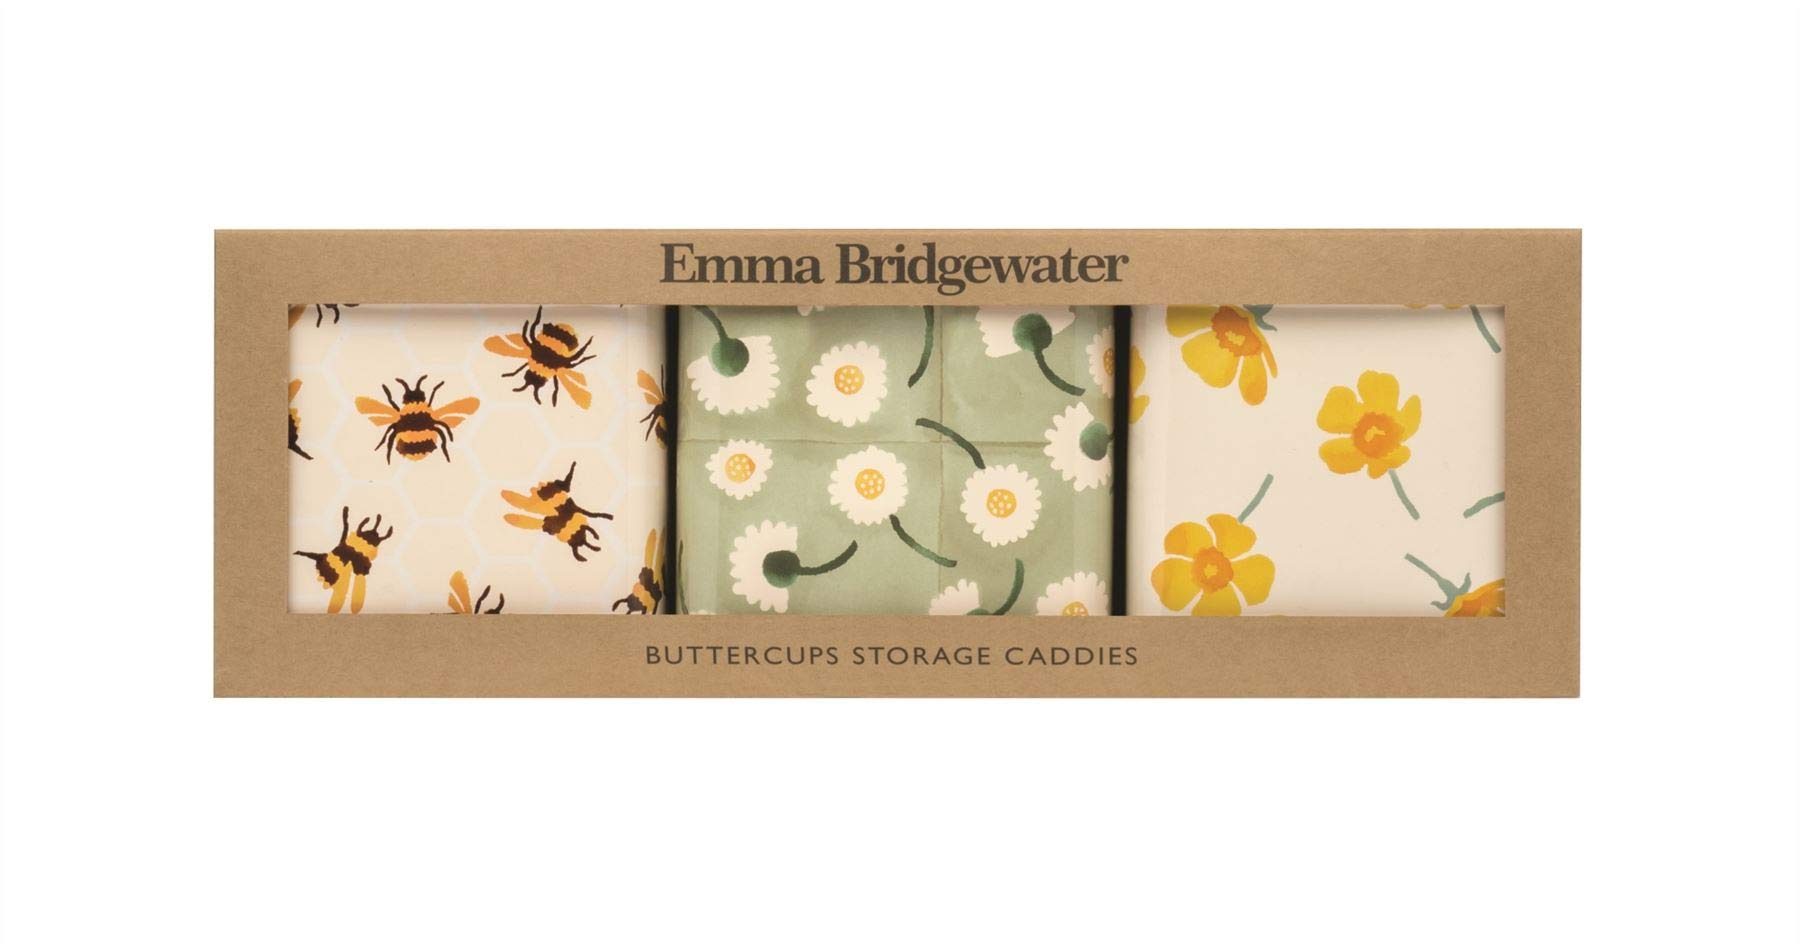 Elite Tins Emma Bridgewater Buttercups Set of 3 Tin Coffee Sugar Tins Containers Canisters Jars